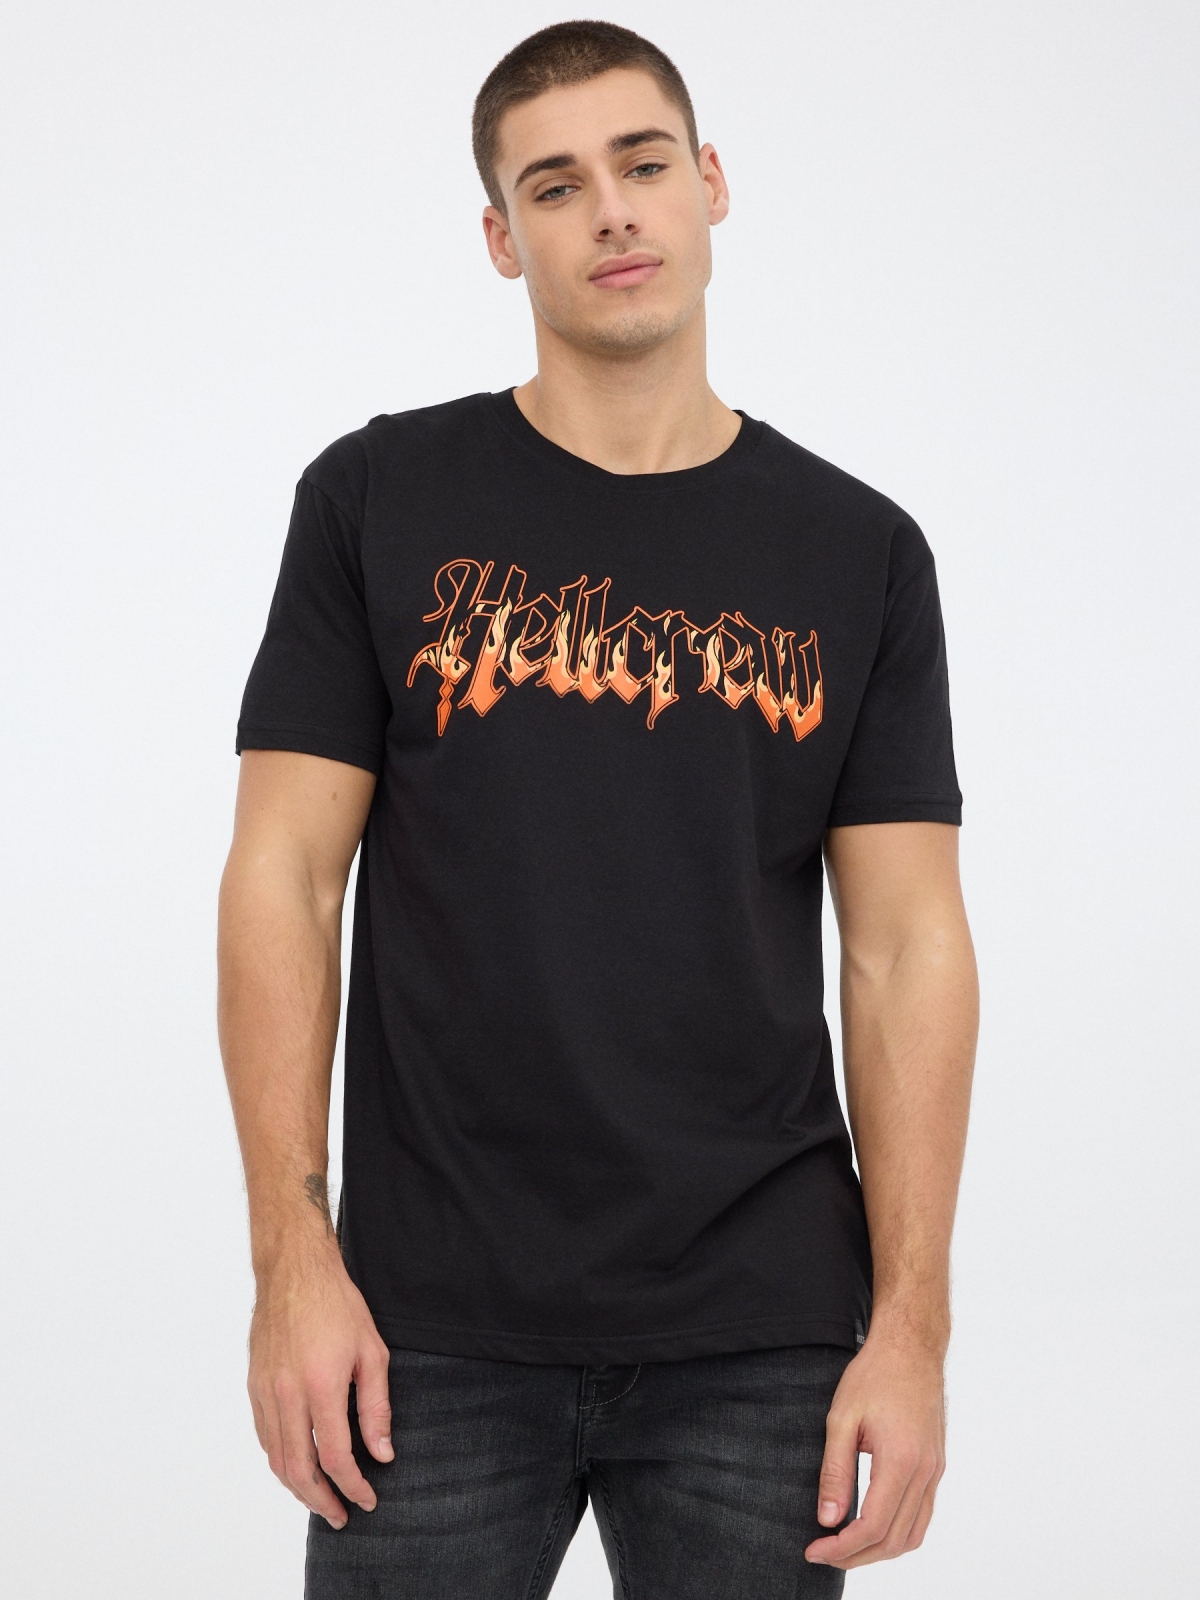 Hell T-shirt black middle front view